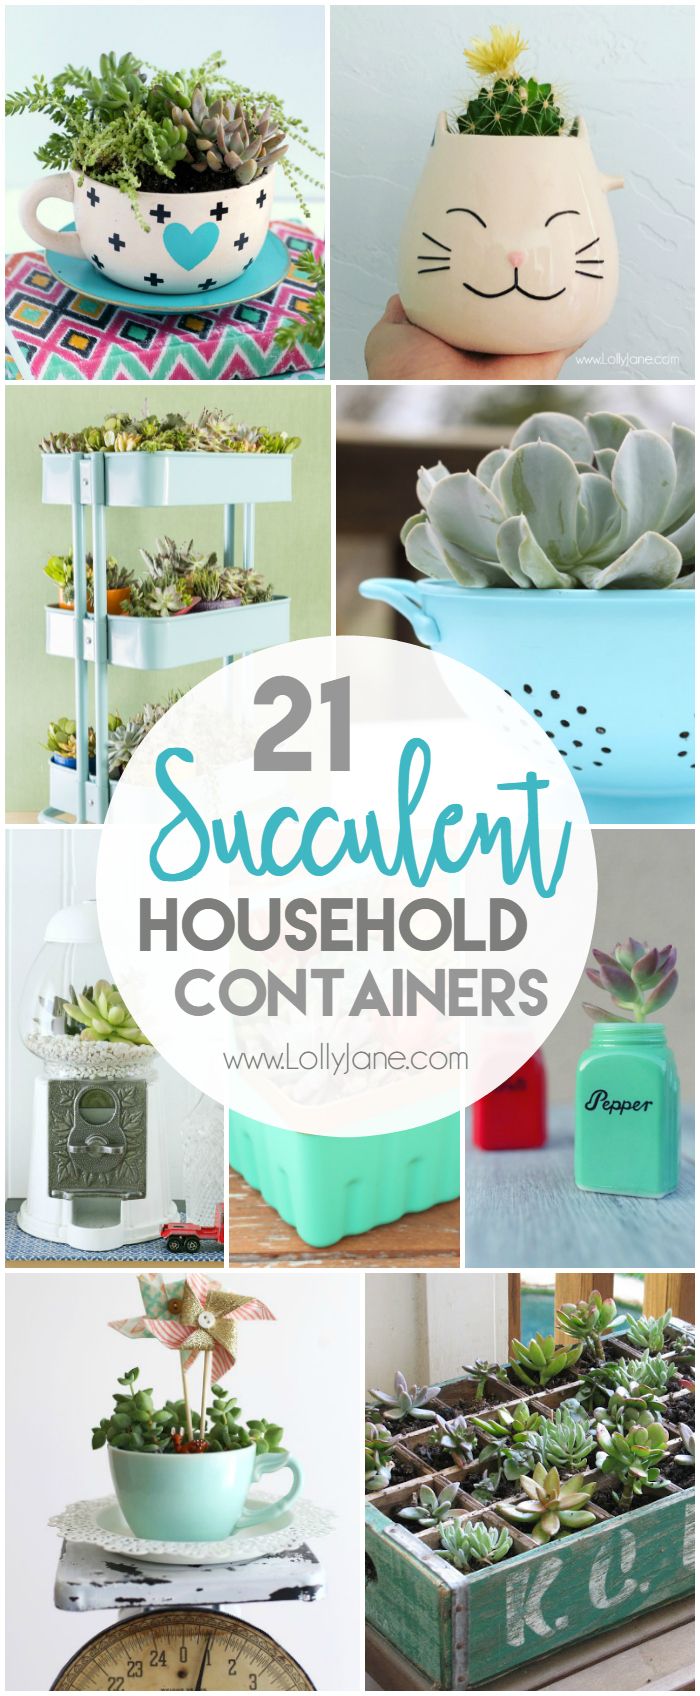 21 household succulent containers